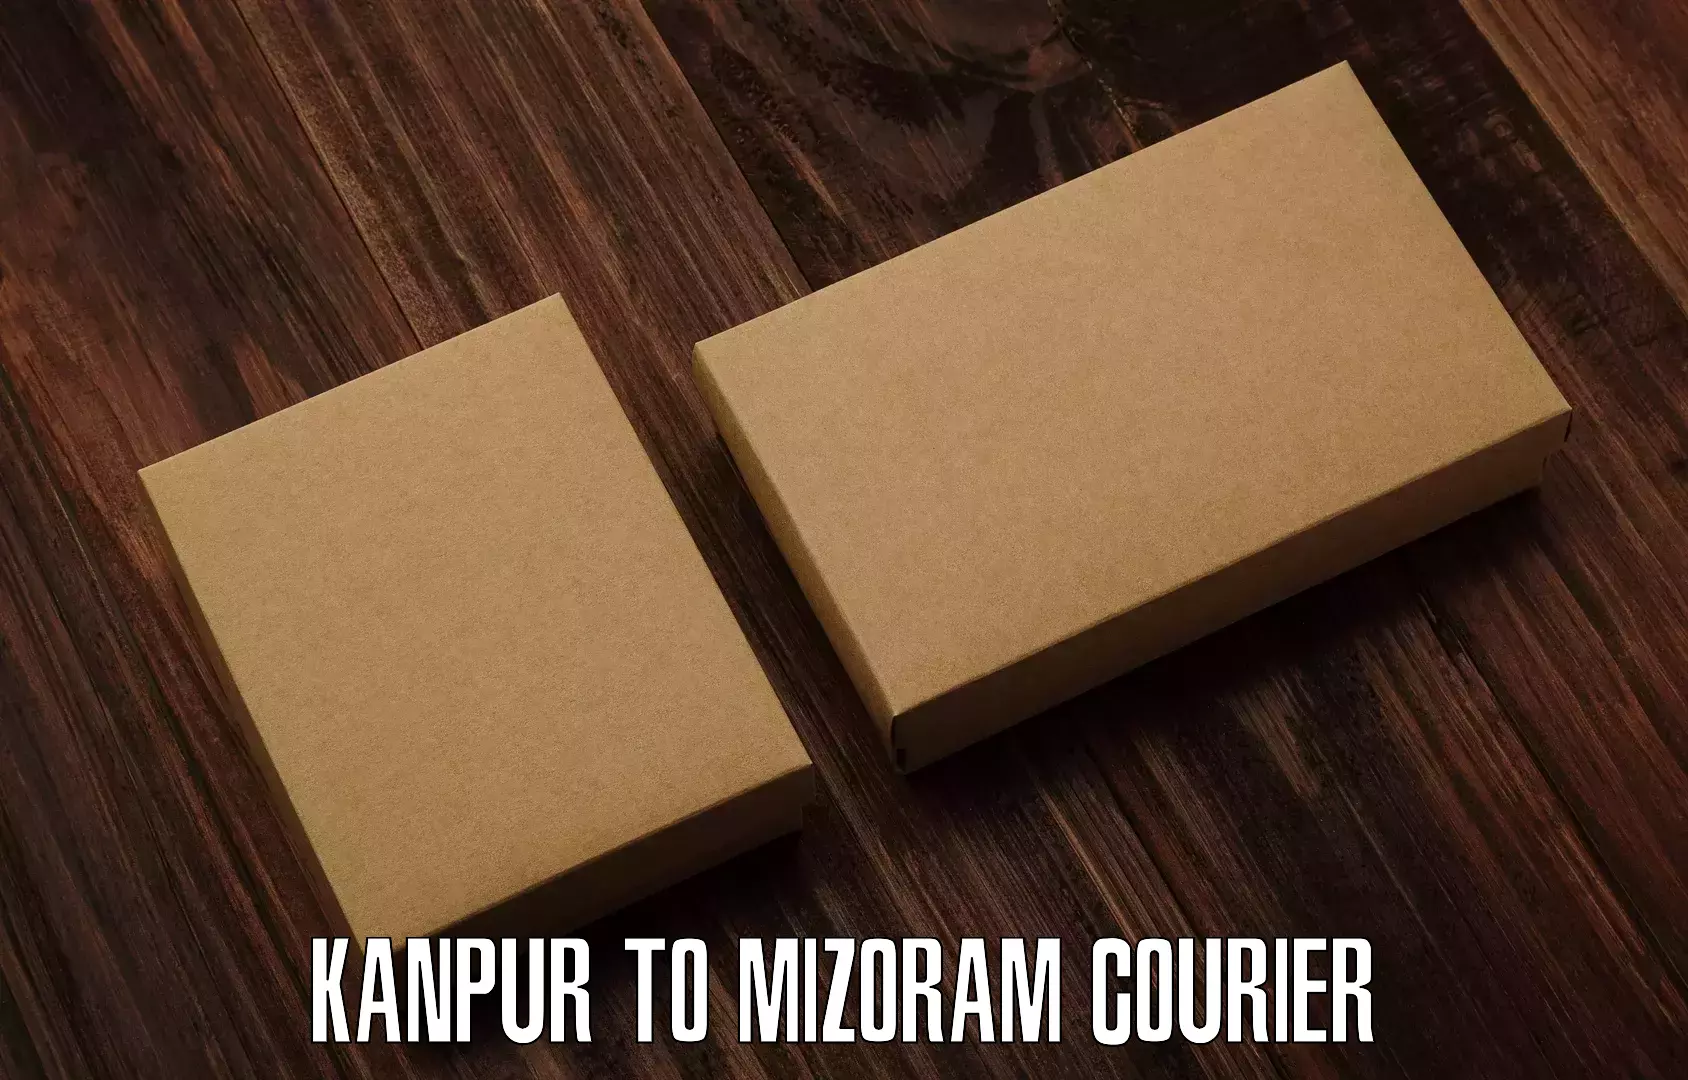 State-of-the-art courier technology Kanpur to Mizoram